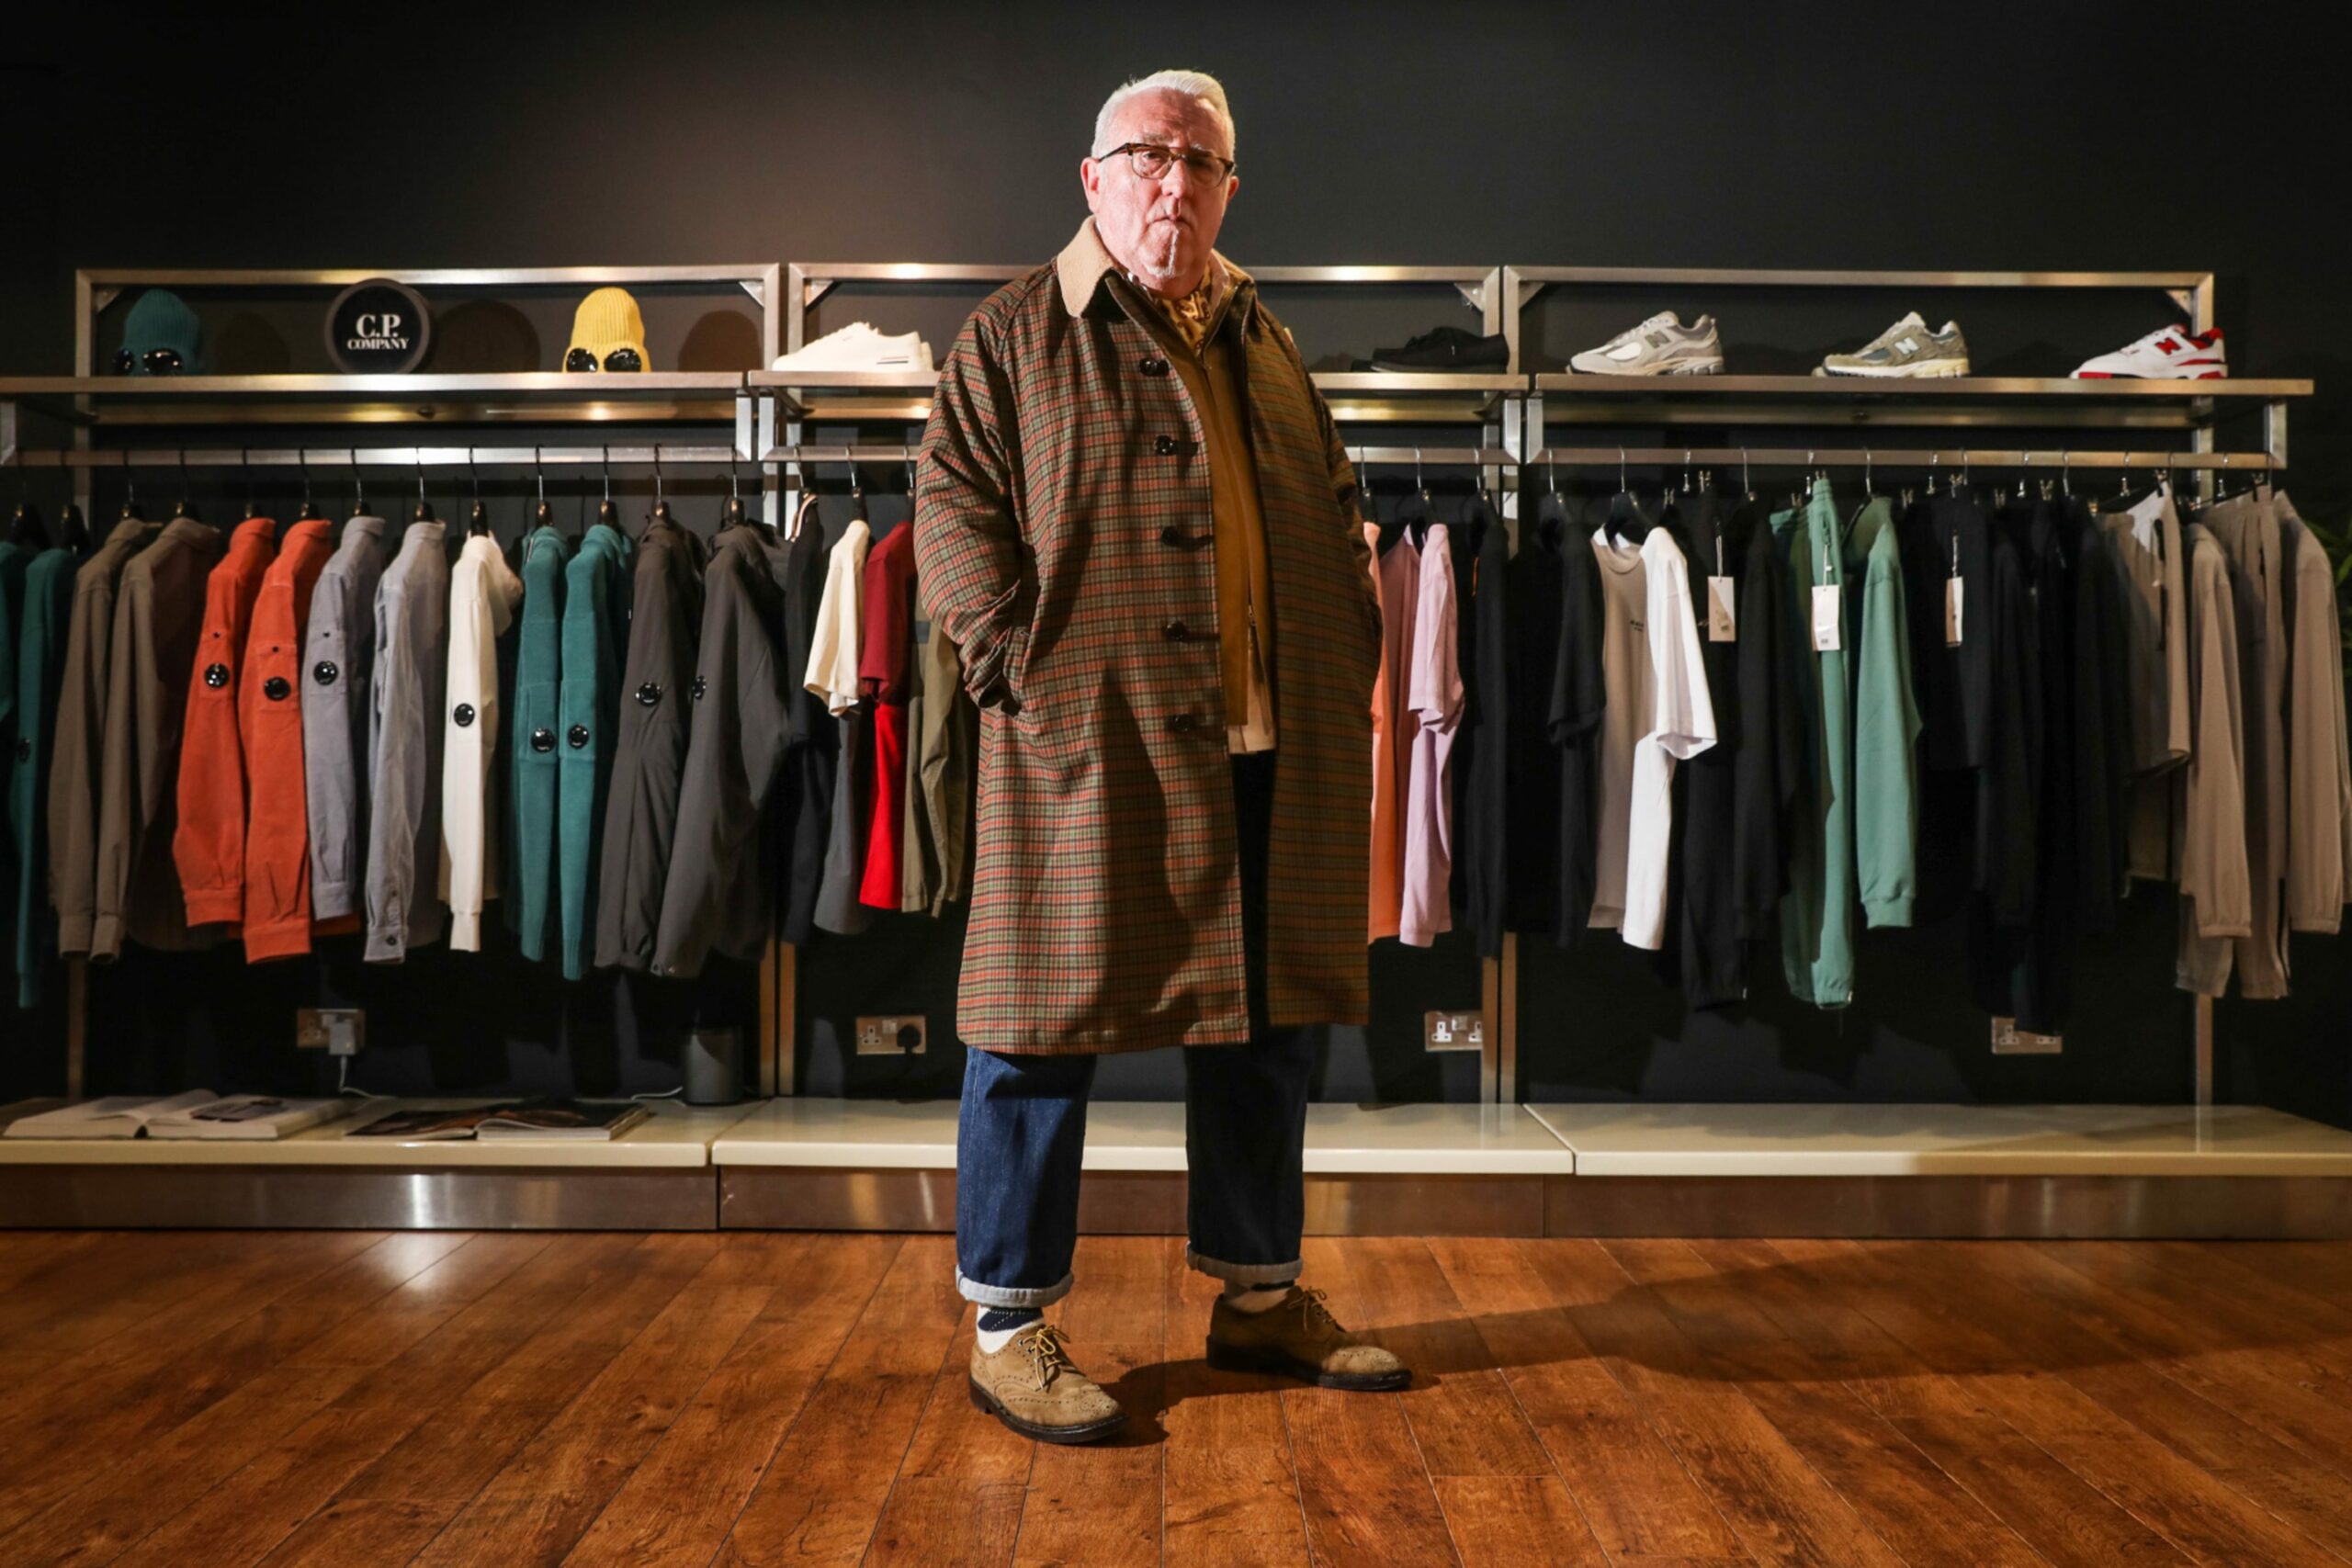 Manifesto owner Forrey Rosscraig in Dundee store.